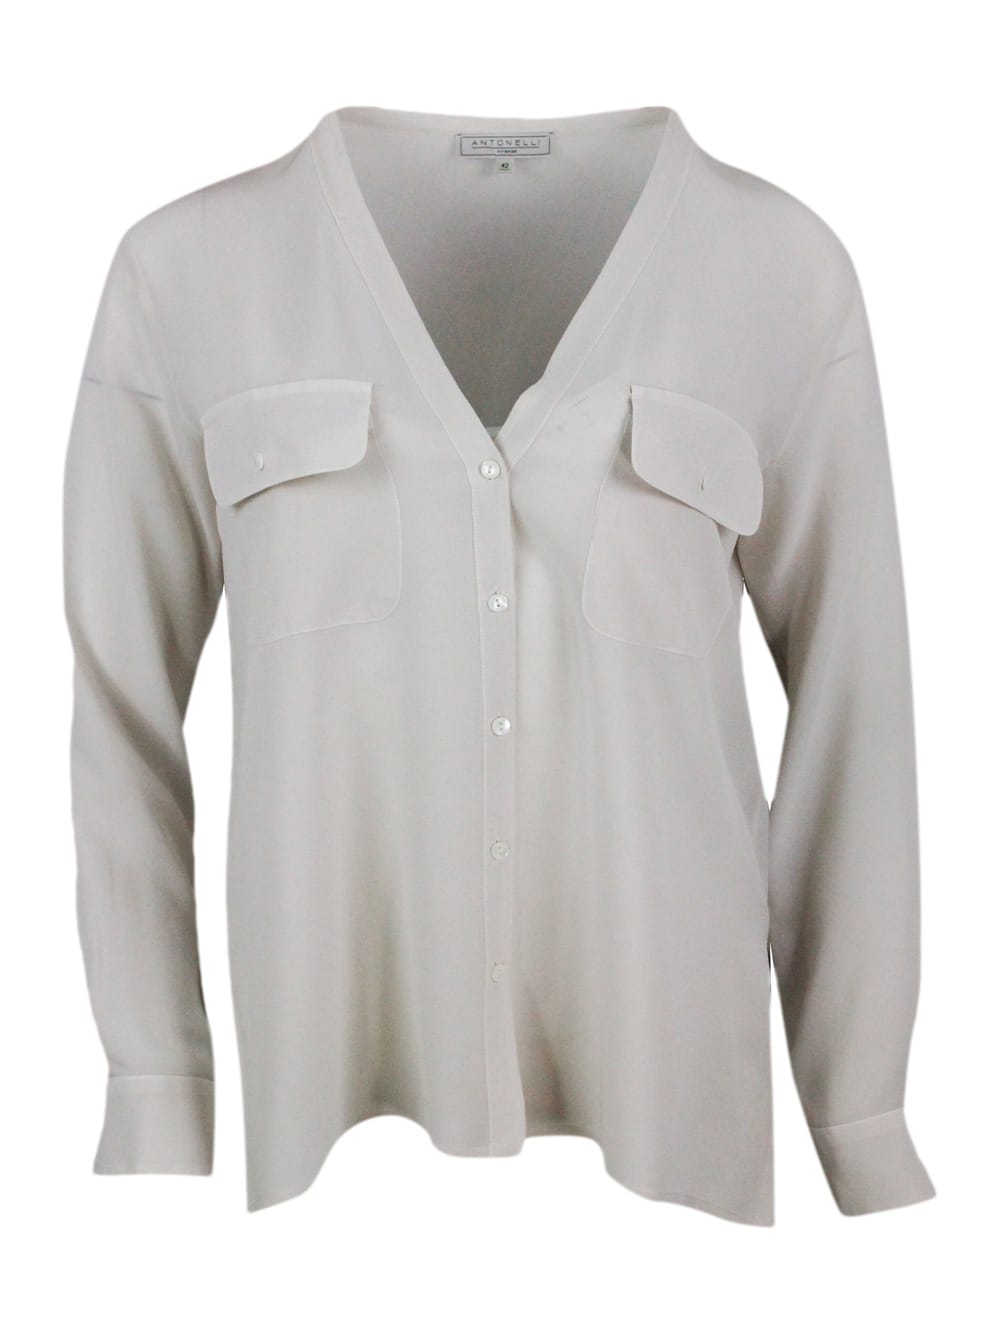 Shop Antonelli Shirt Made Of Soft Stretch Silk, With V-neck, Chest Pockets And Button Closure In Beige